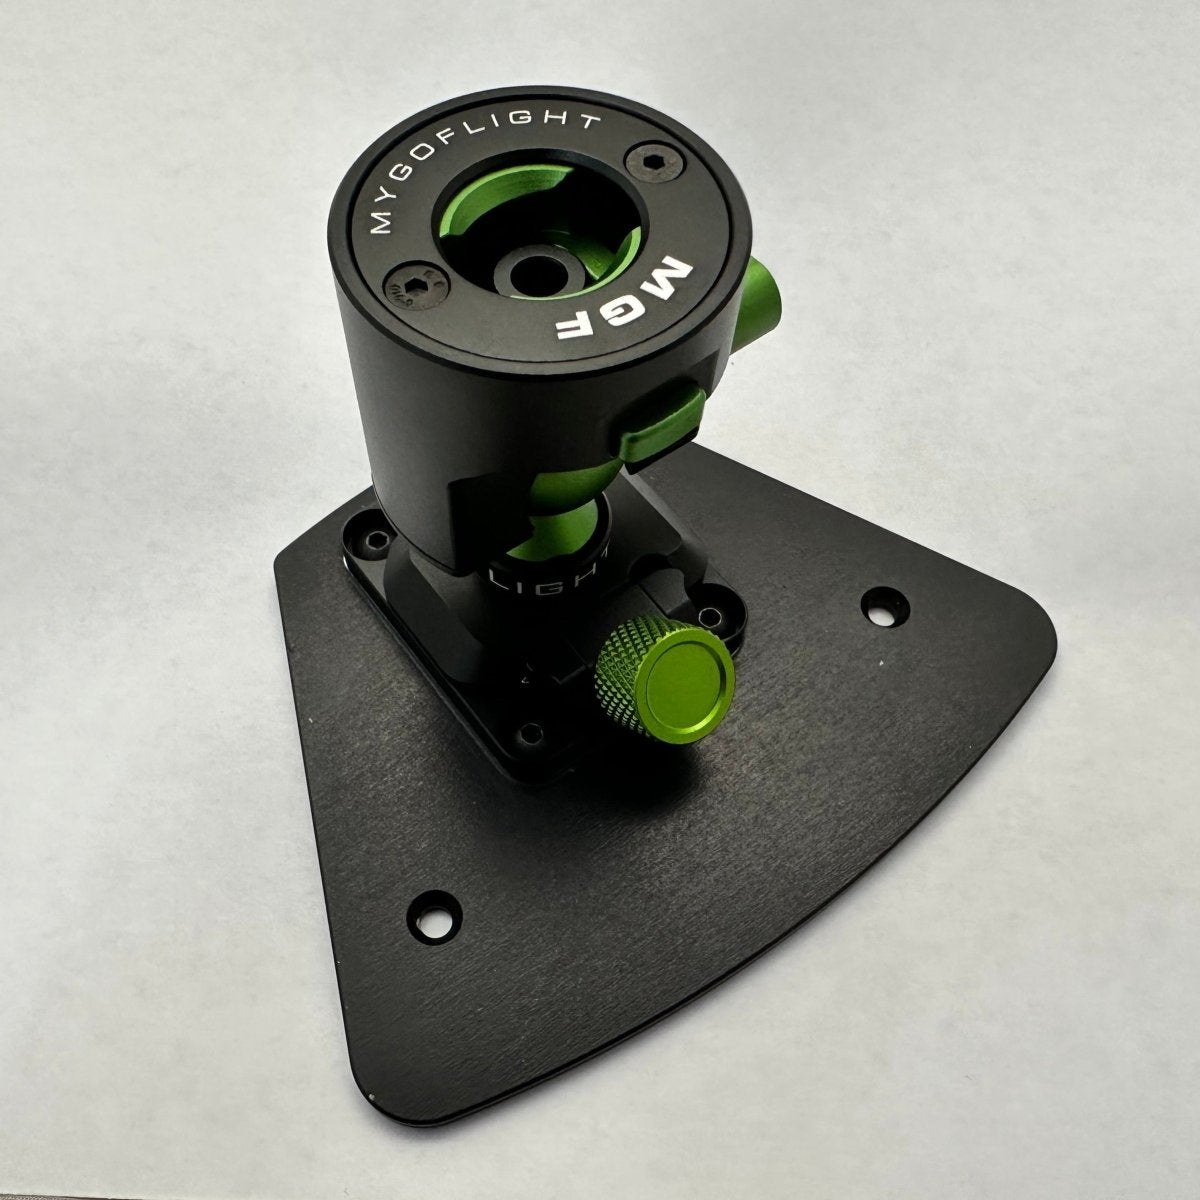 Beech Yoke Faceplate Compact Quick Release - Preorder - Ships in 2-3 Weeks - MYGOFLIGHT